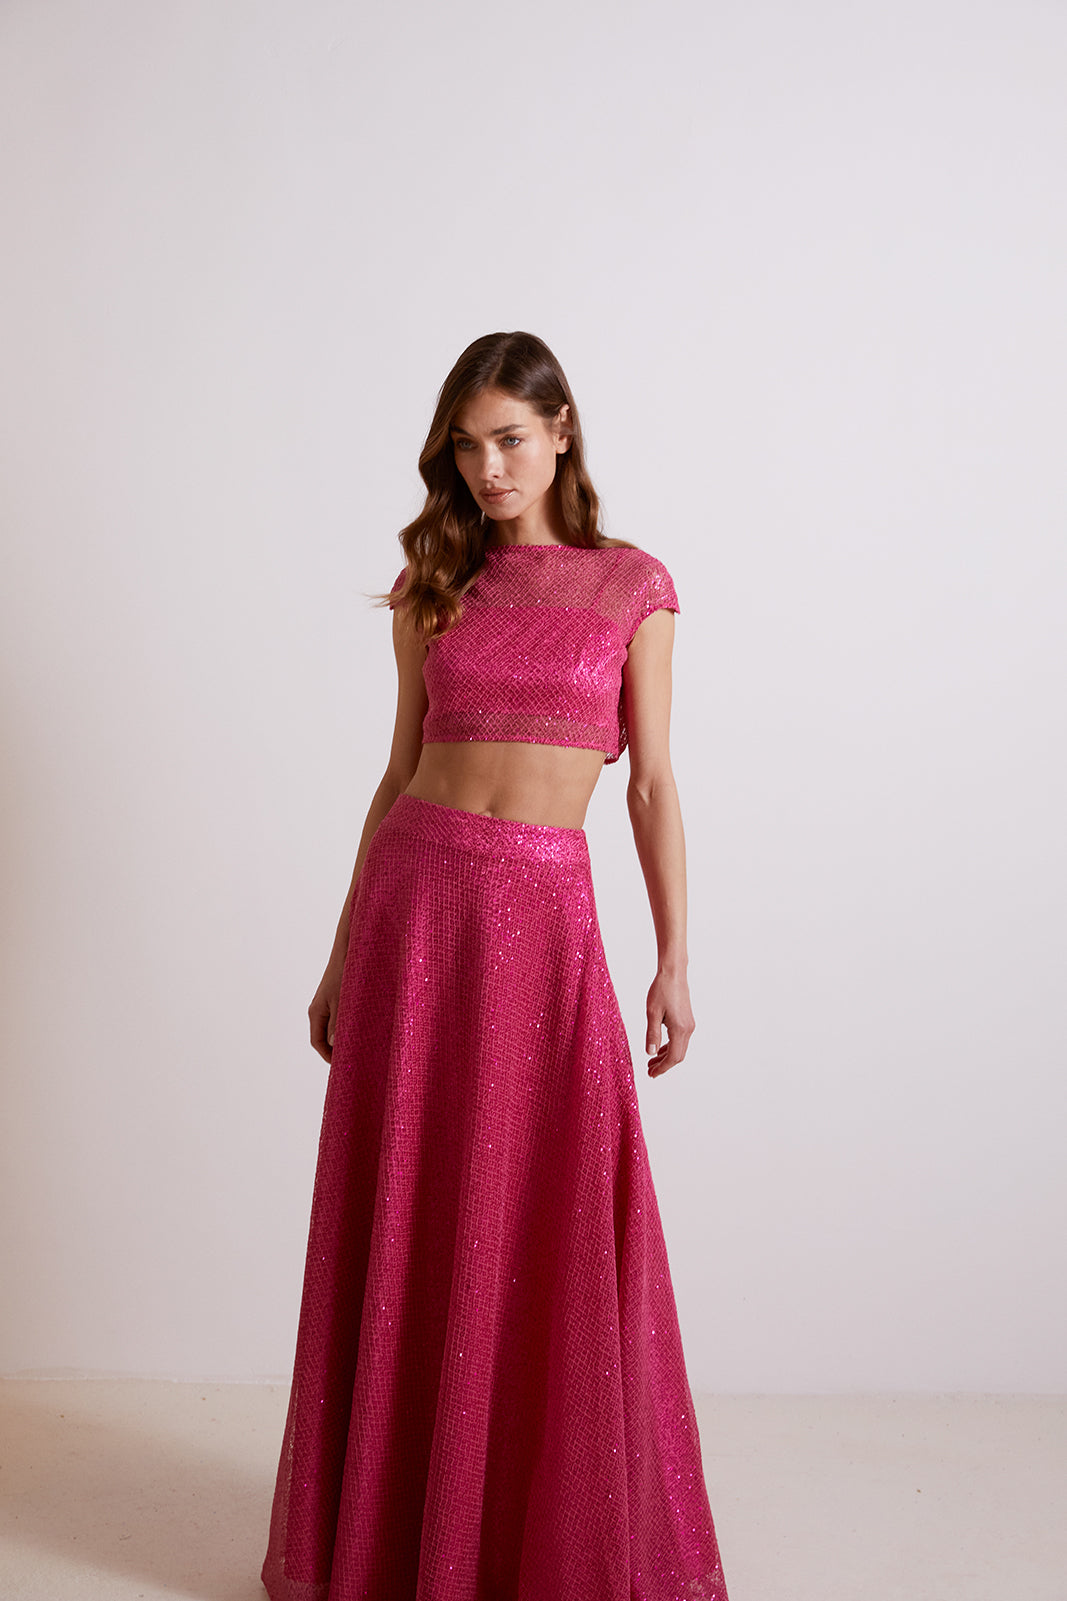 SEQUINED PINK LONG SKIRT